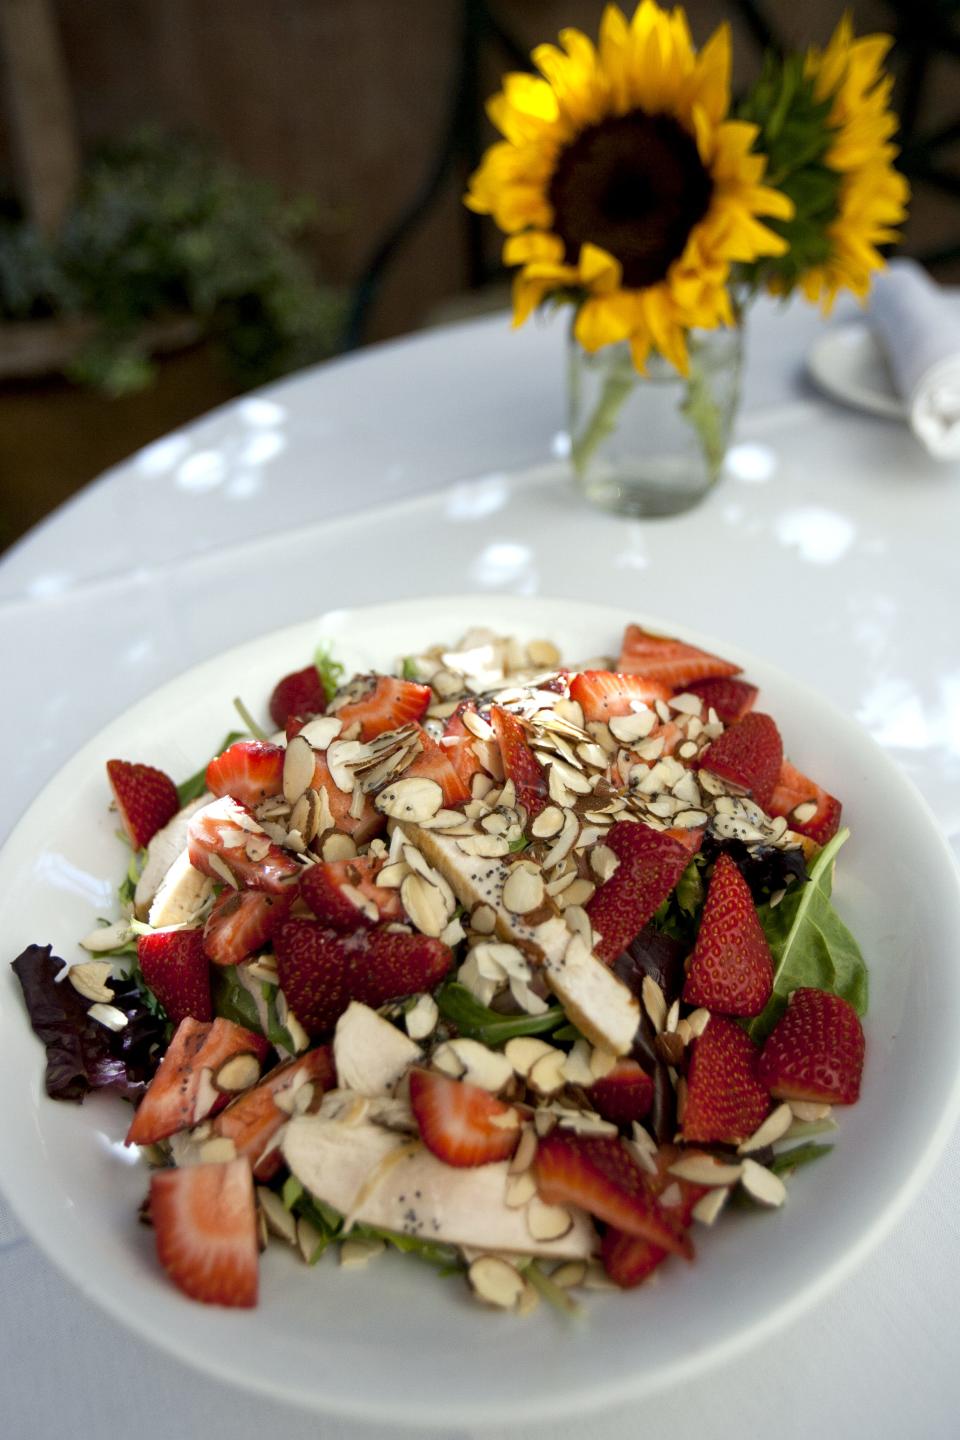 Strawberry Chicken Salad is a specialty dish at Arcadia Farms in Scottsdale.